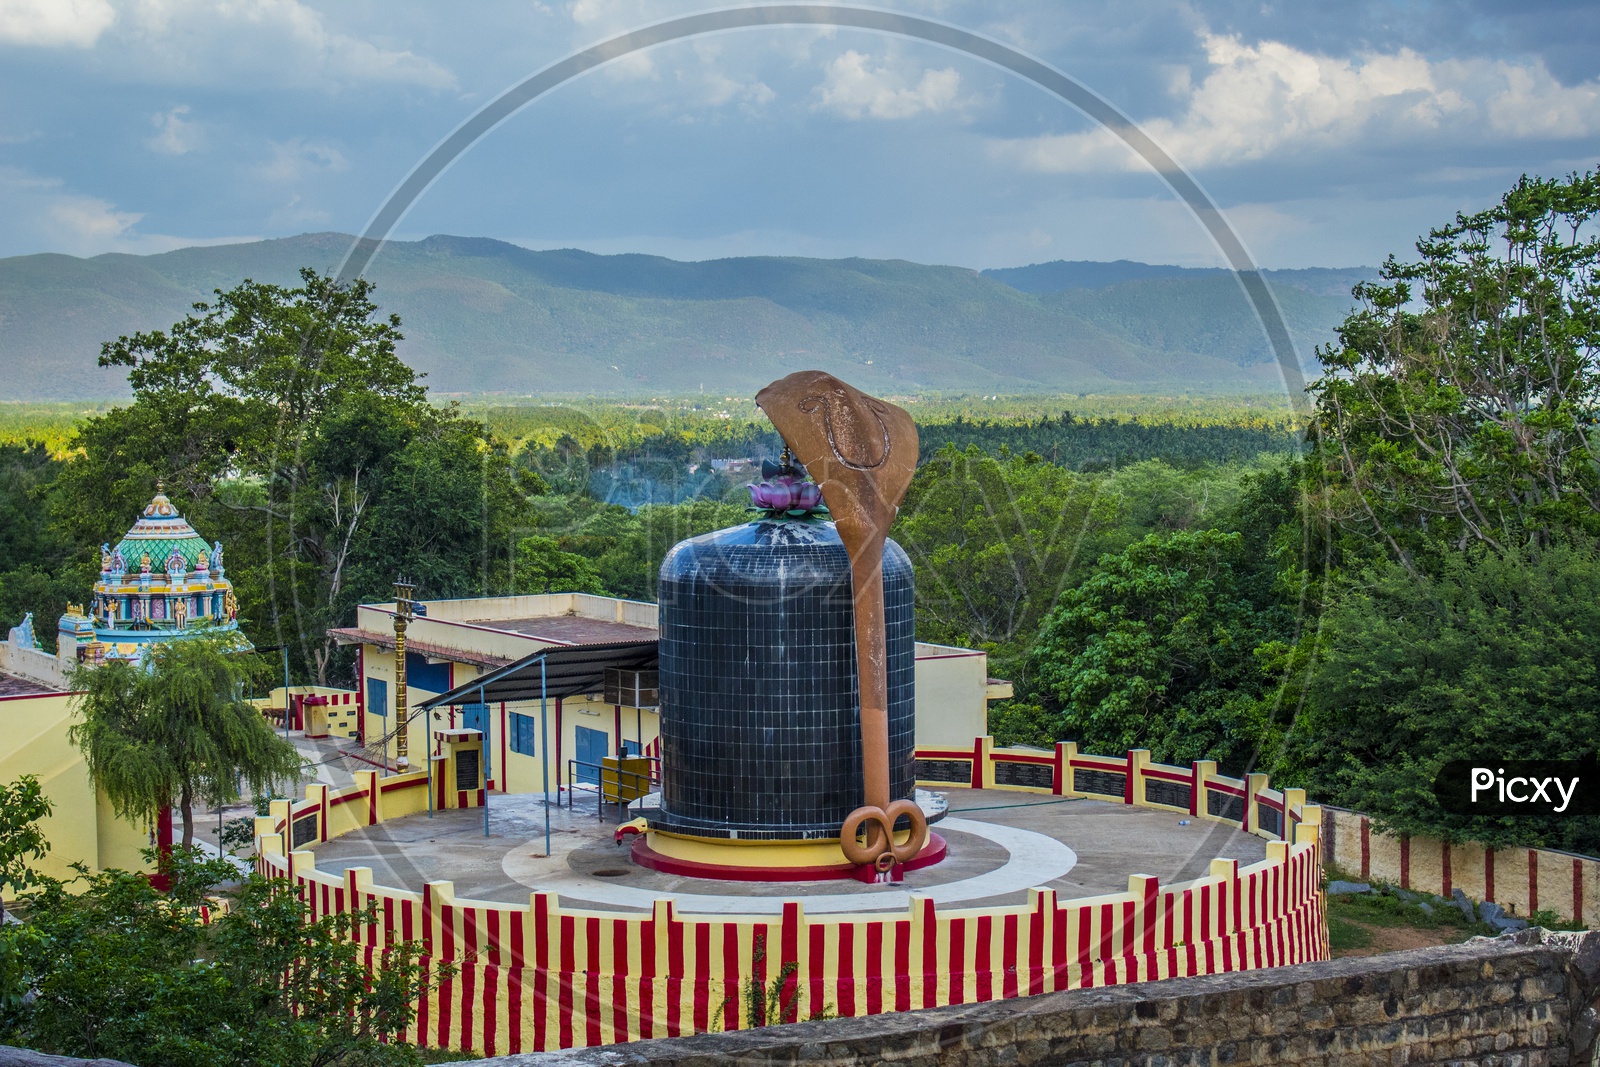 The Lord Shiva Linga between the mountains.